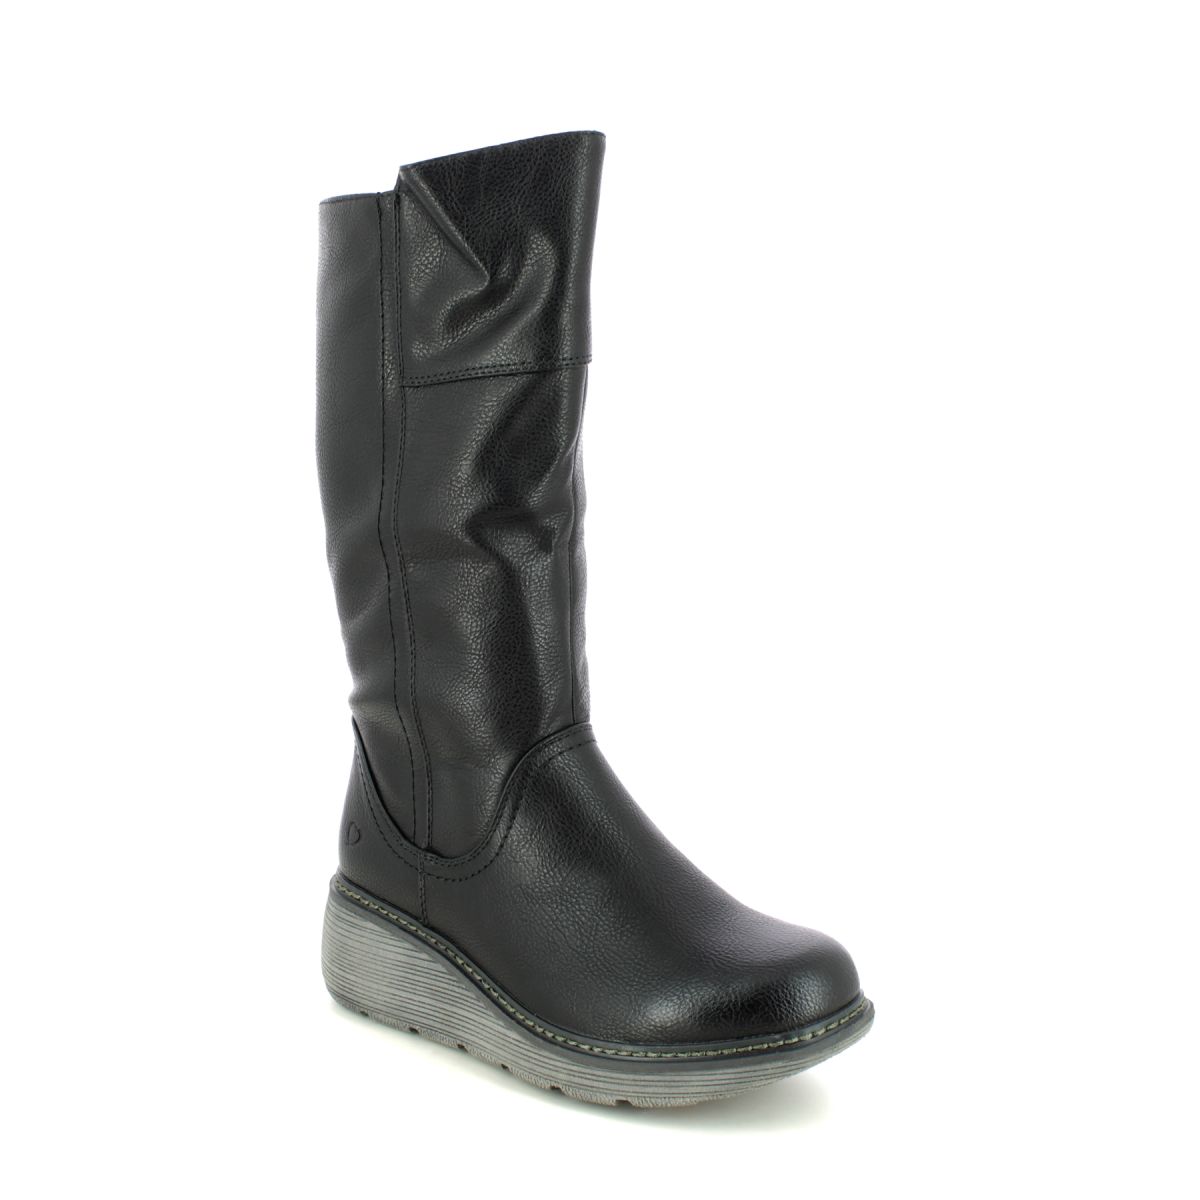 Heavenly Feet Lombardy Wedge Black Womens Mid Calf Boots 3005-34 In Size 3 In Plain Black